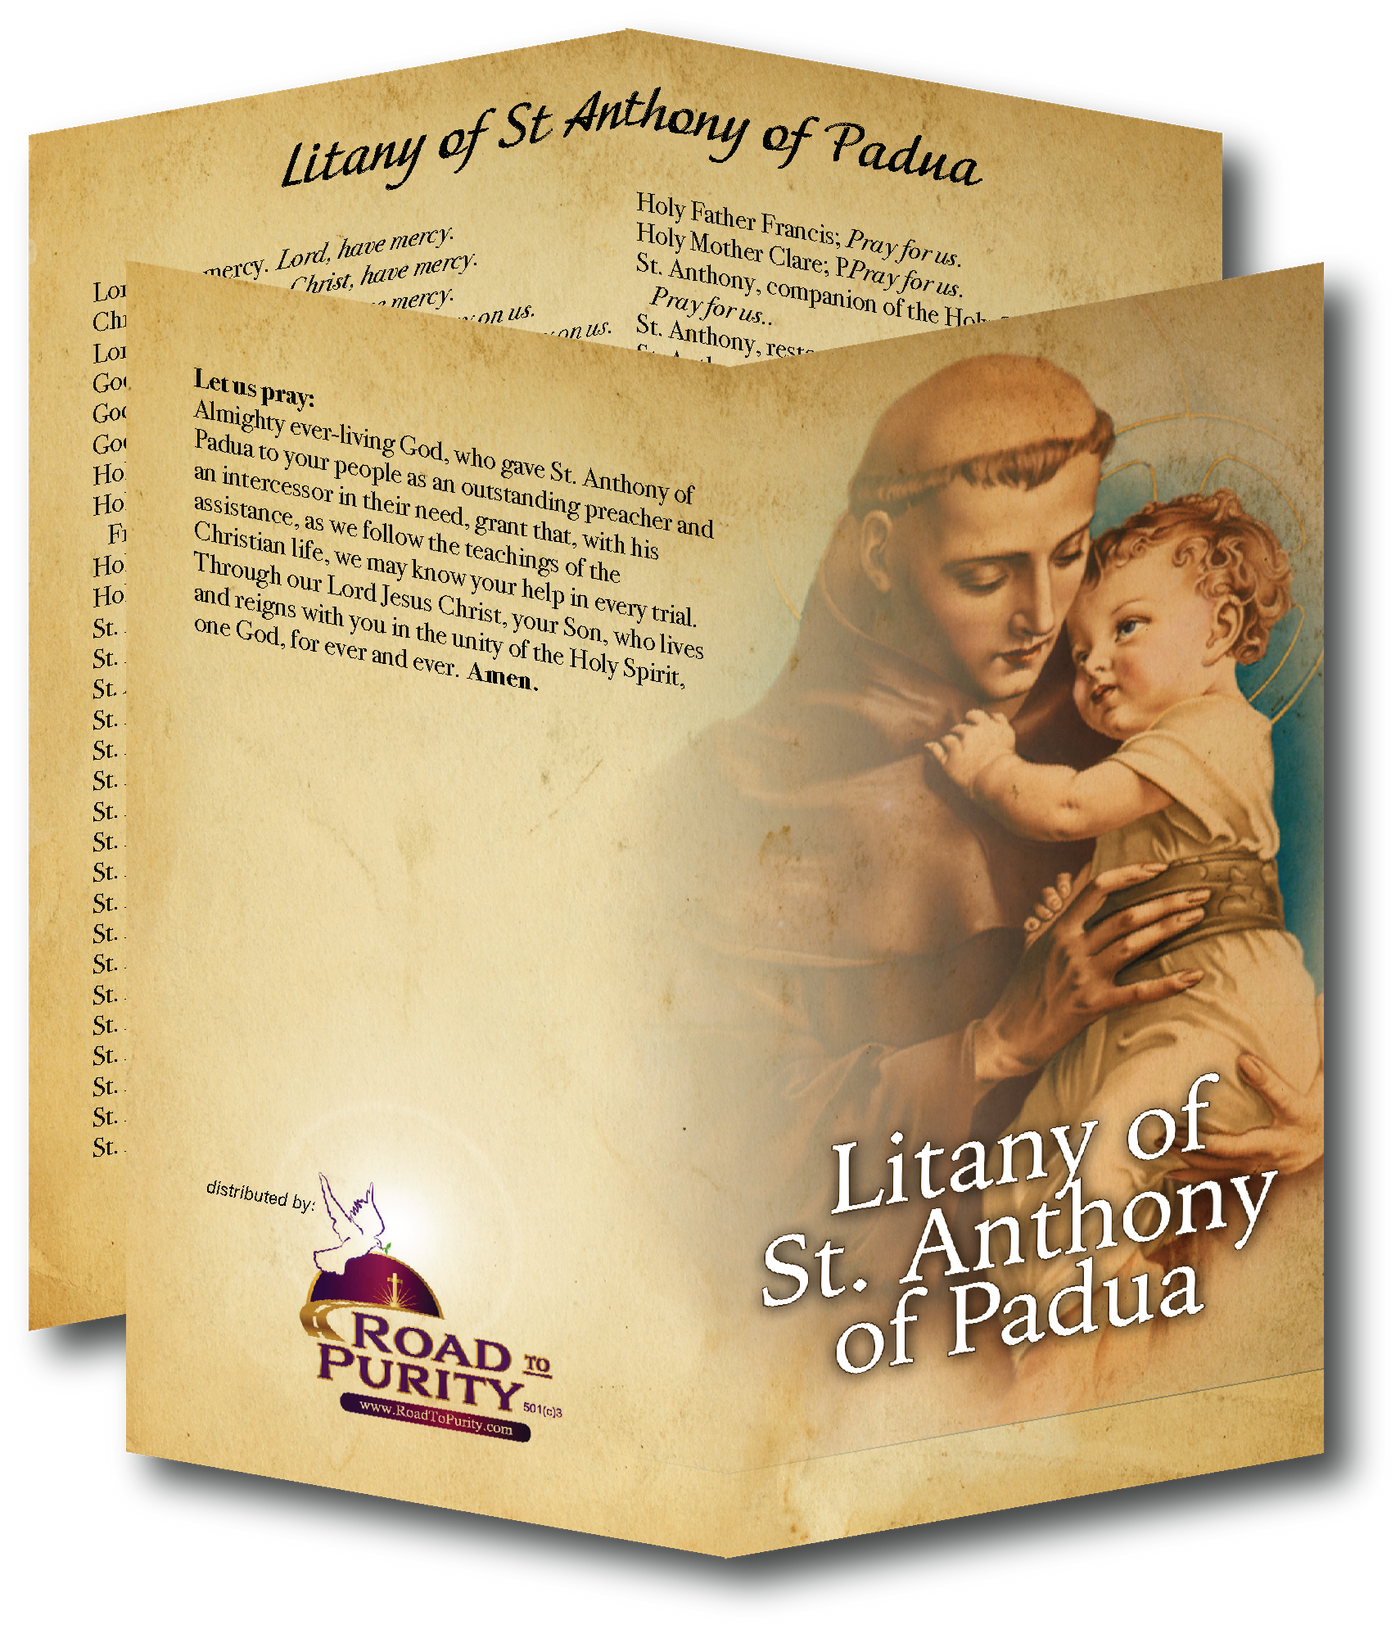 Litany of St Anthony of Padua